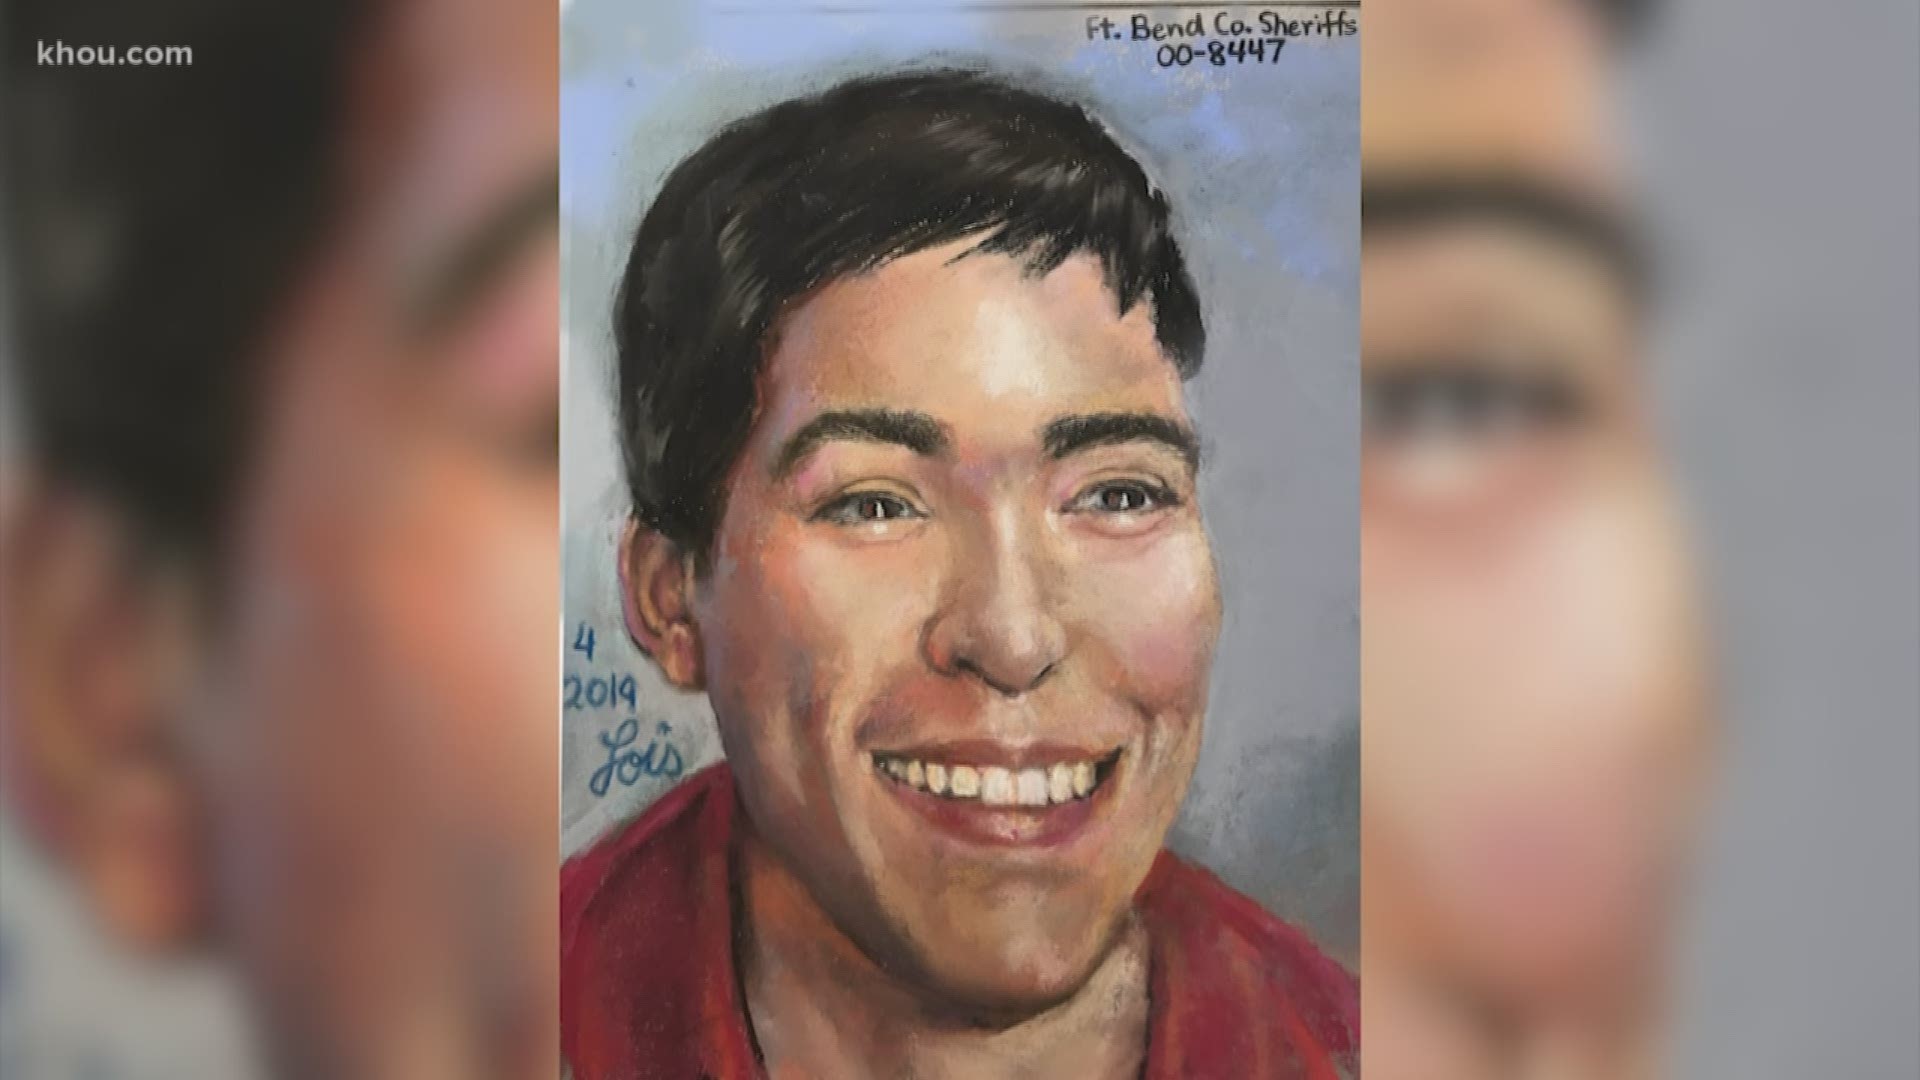 The Fort Bend County Sheriff’s Office said they are seeking to identify the remains of a young Hispanic man that were found more than nine years ago.